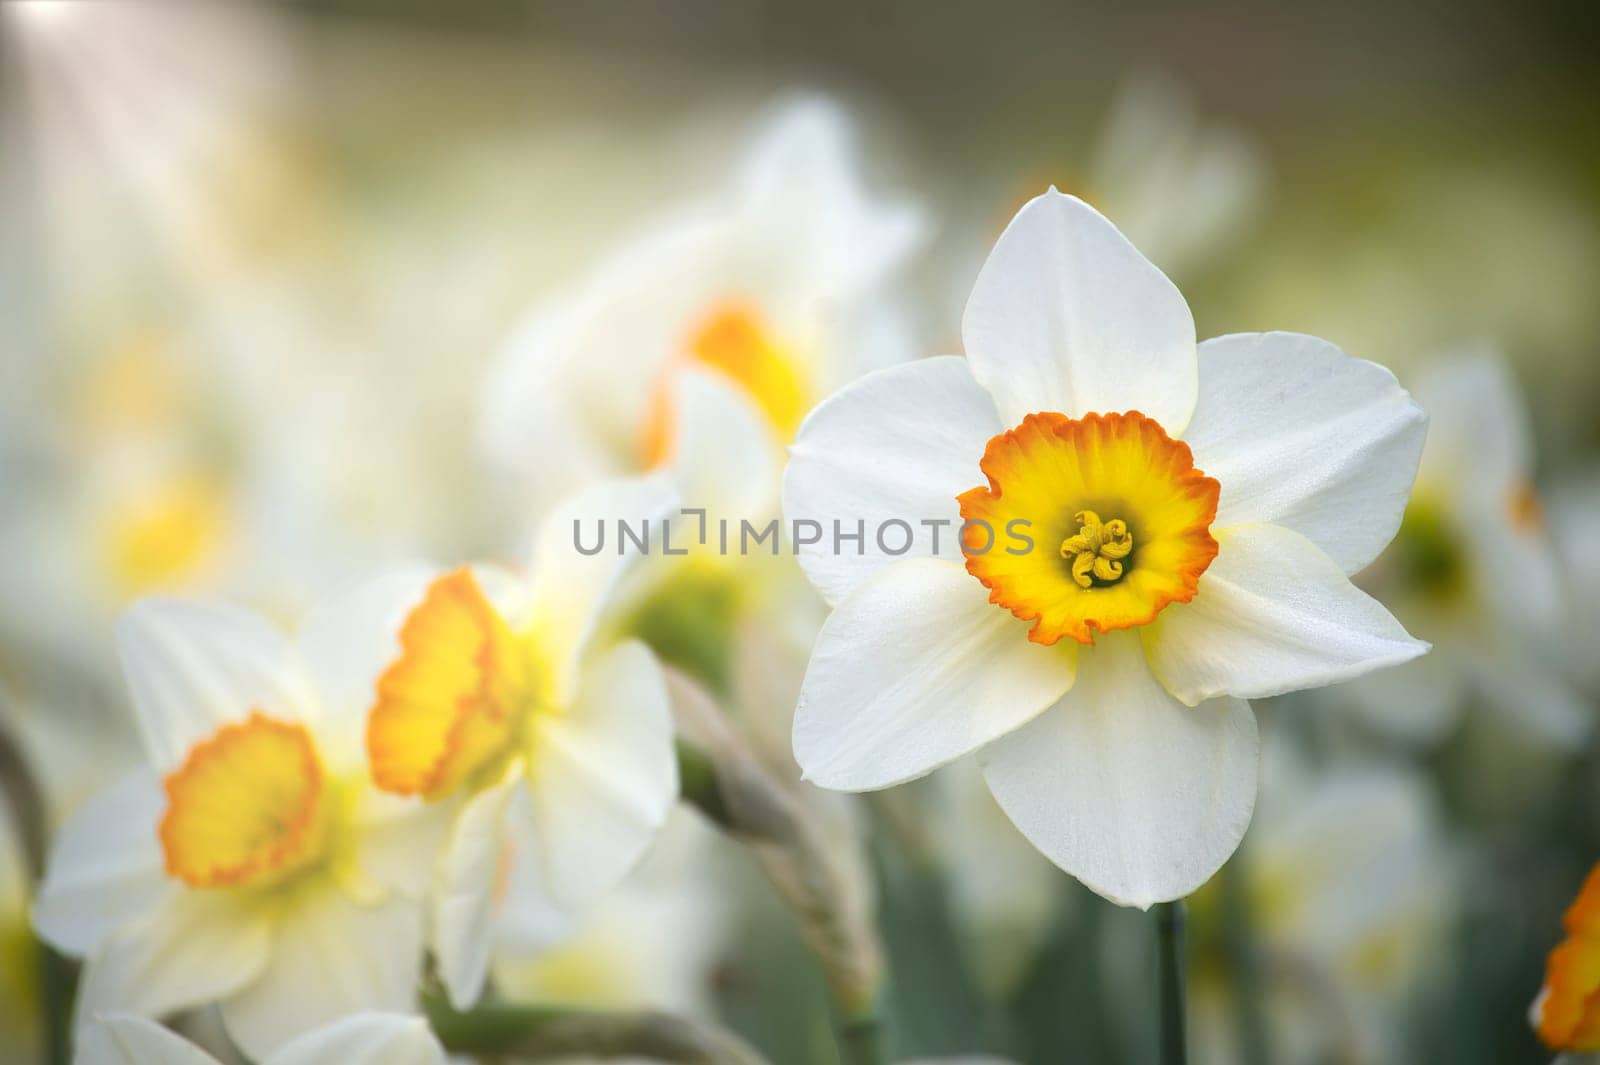 White daffodils also known as narcissus in full bloom, focus on the daffodils creates a sharp contrast with the blurred background